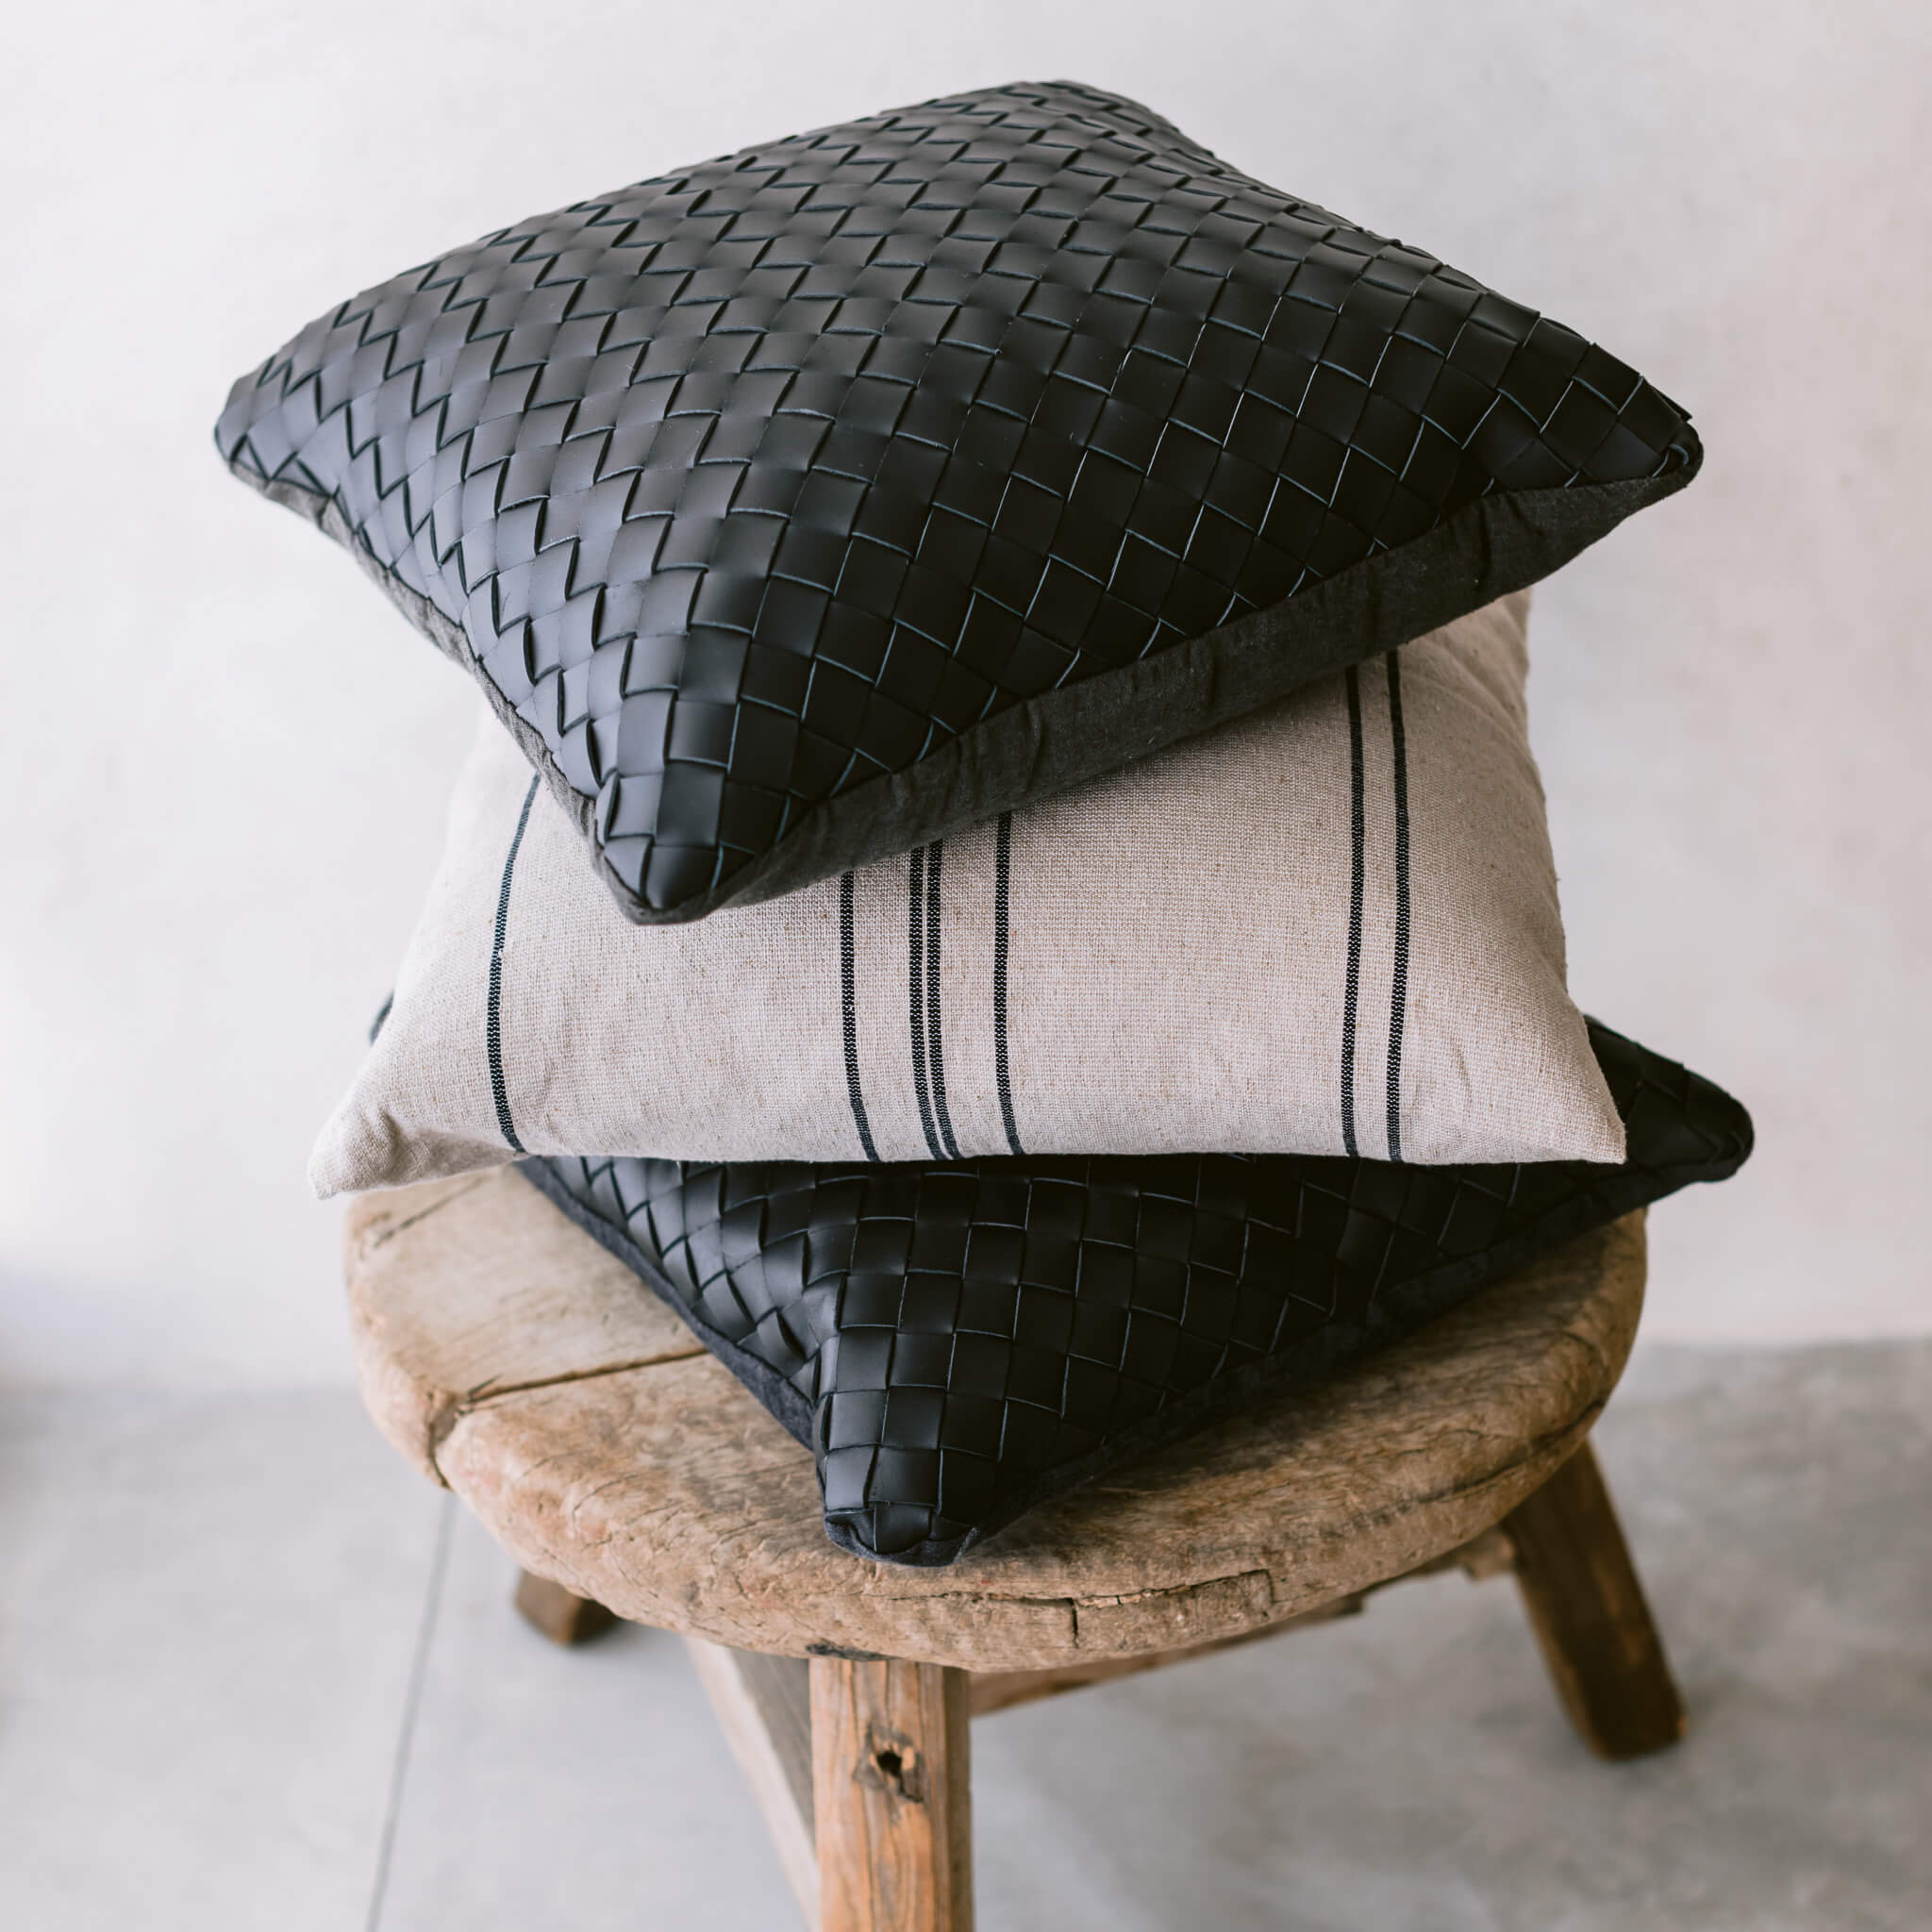 A black braided leather throw pillow stacked on a wood stool.